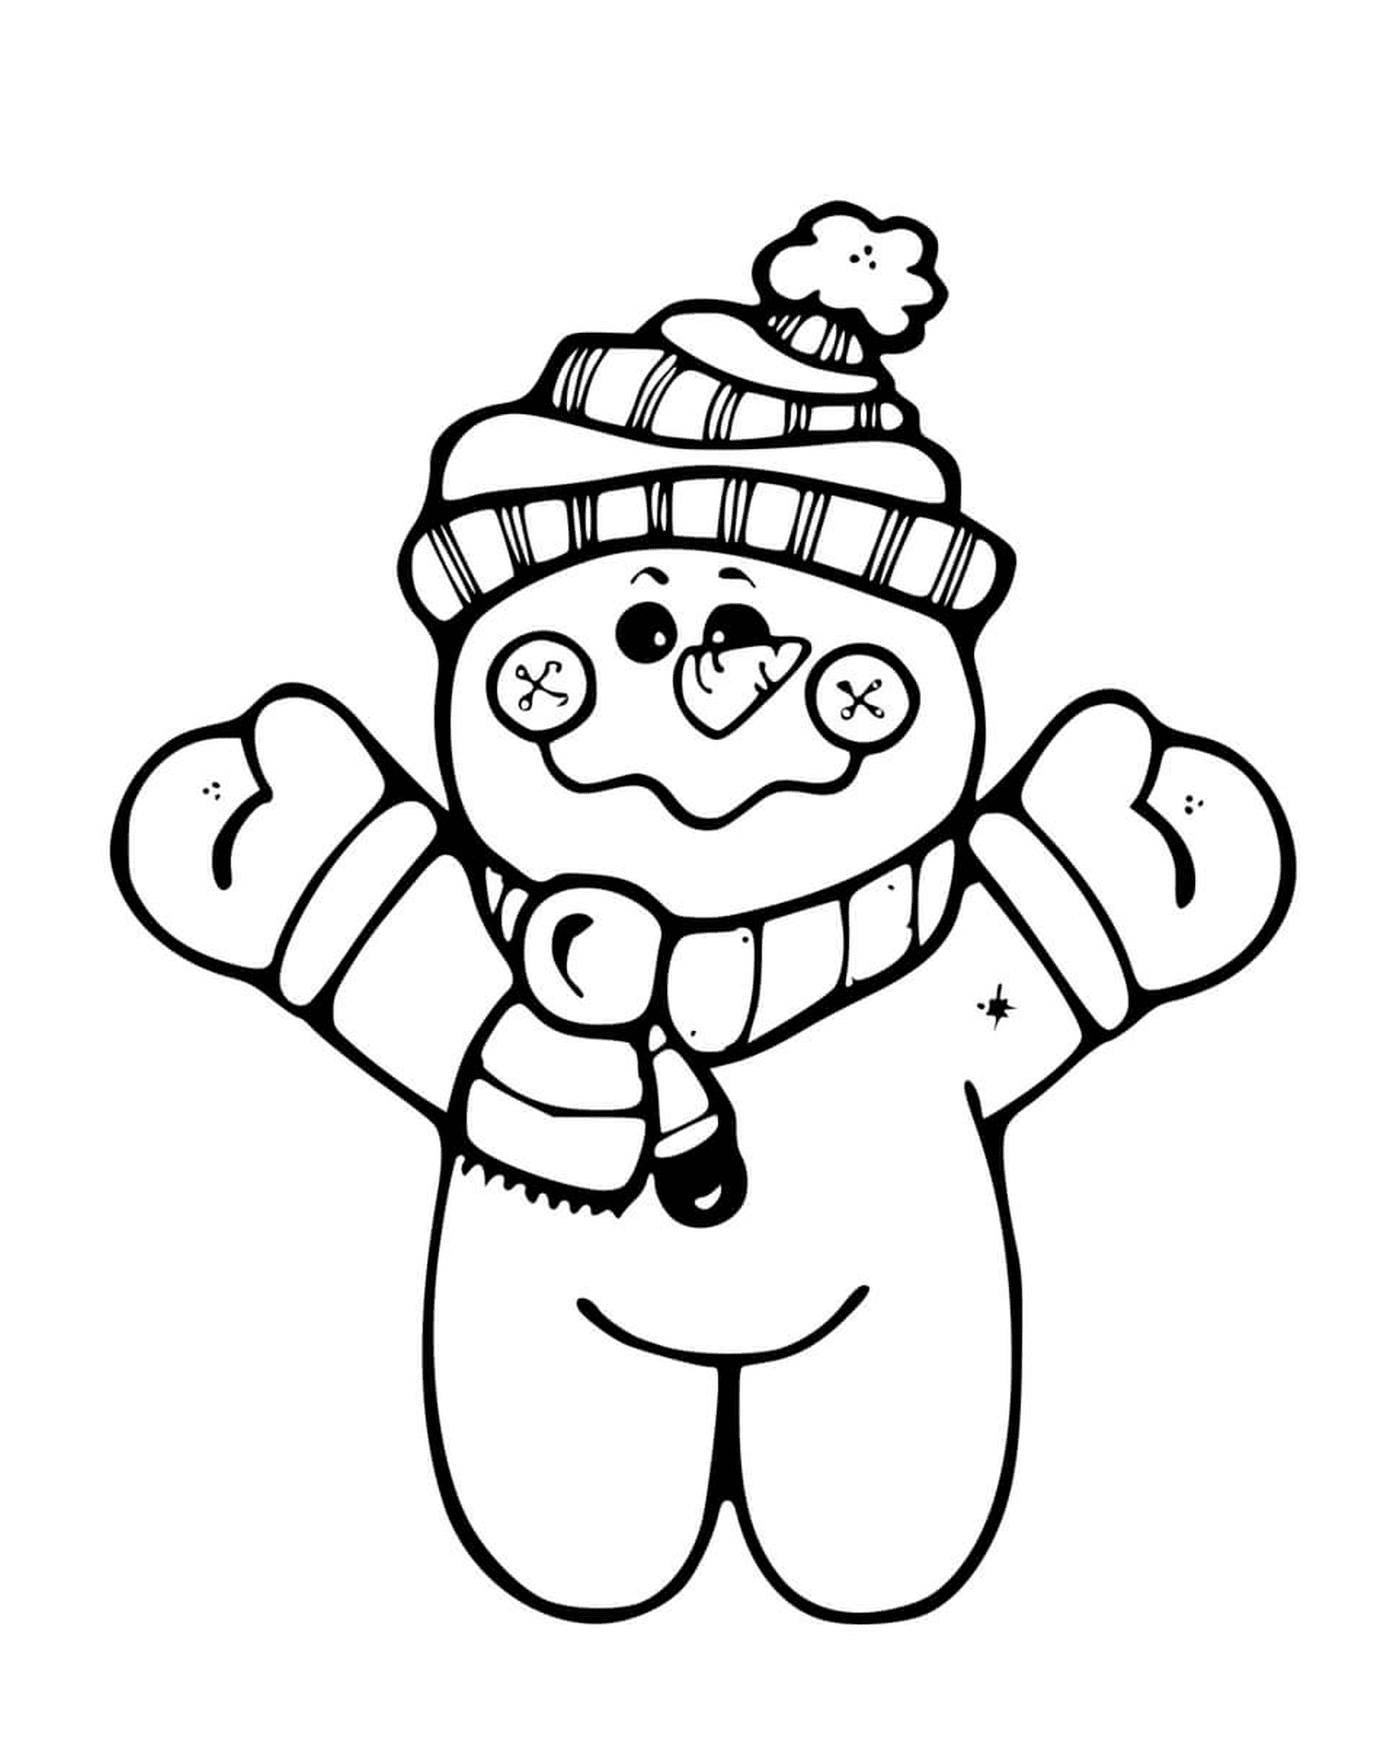  Little snowman standing, wearing a tuque and a scarf 